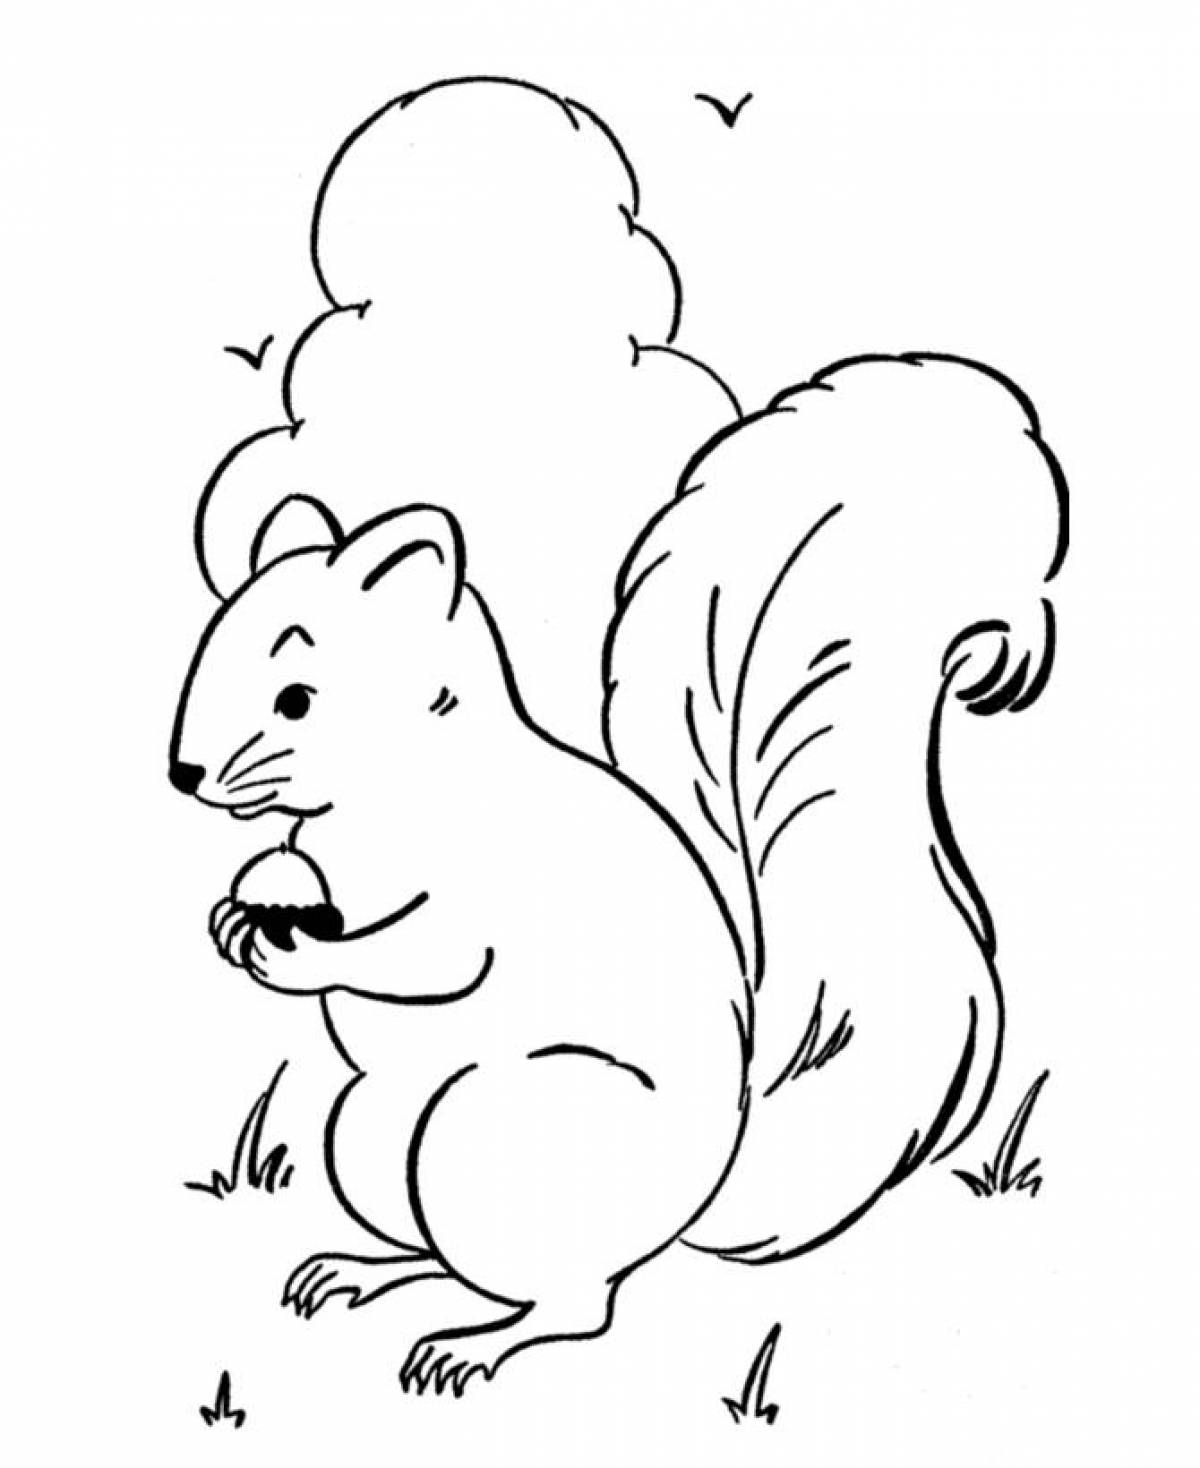 Cute squirrel coloring book for kids